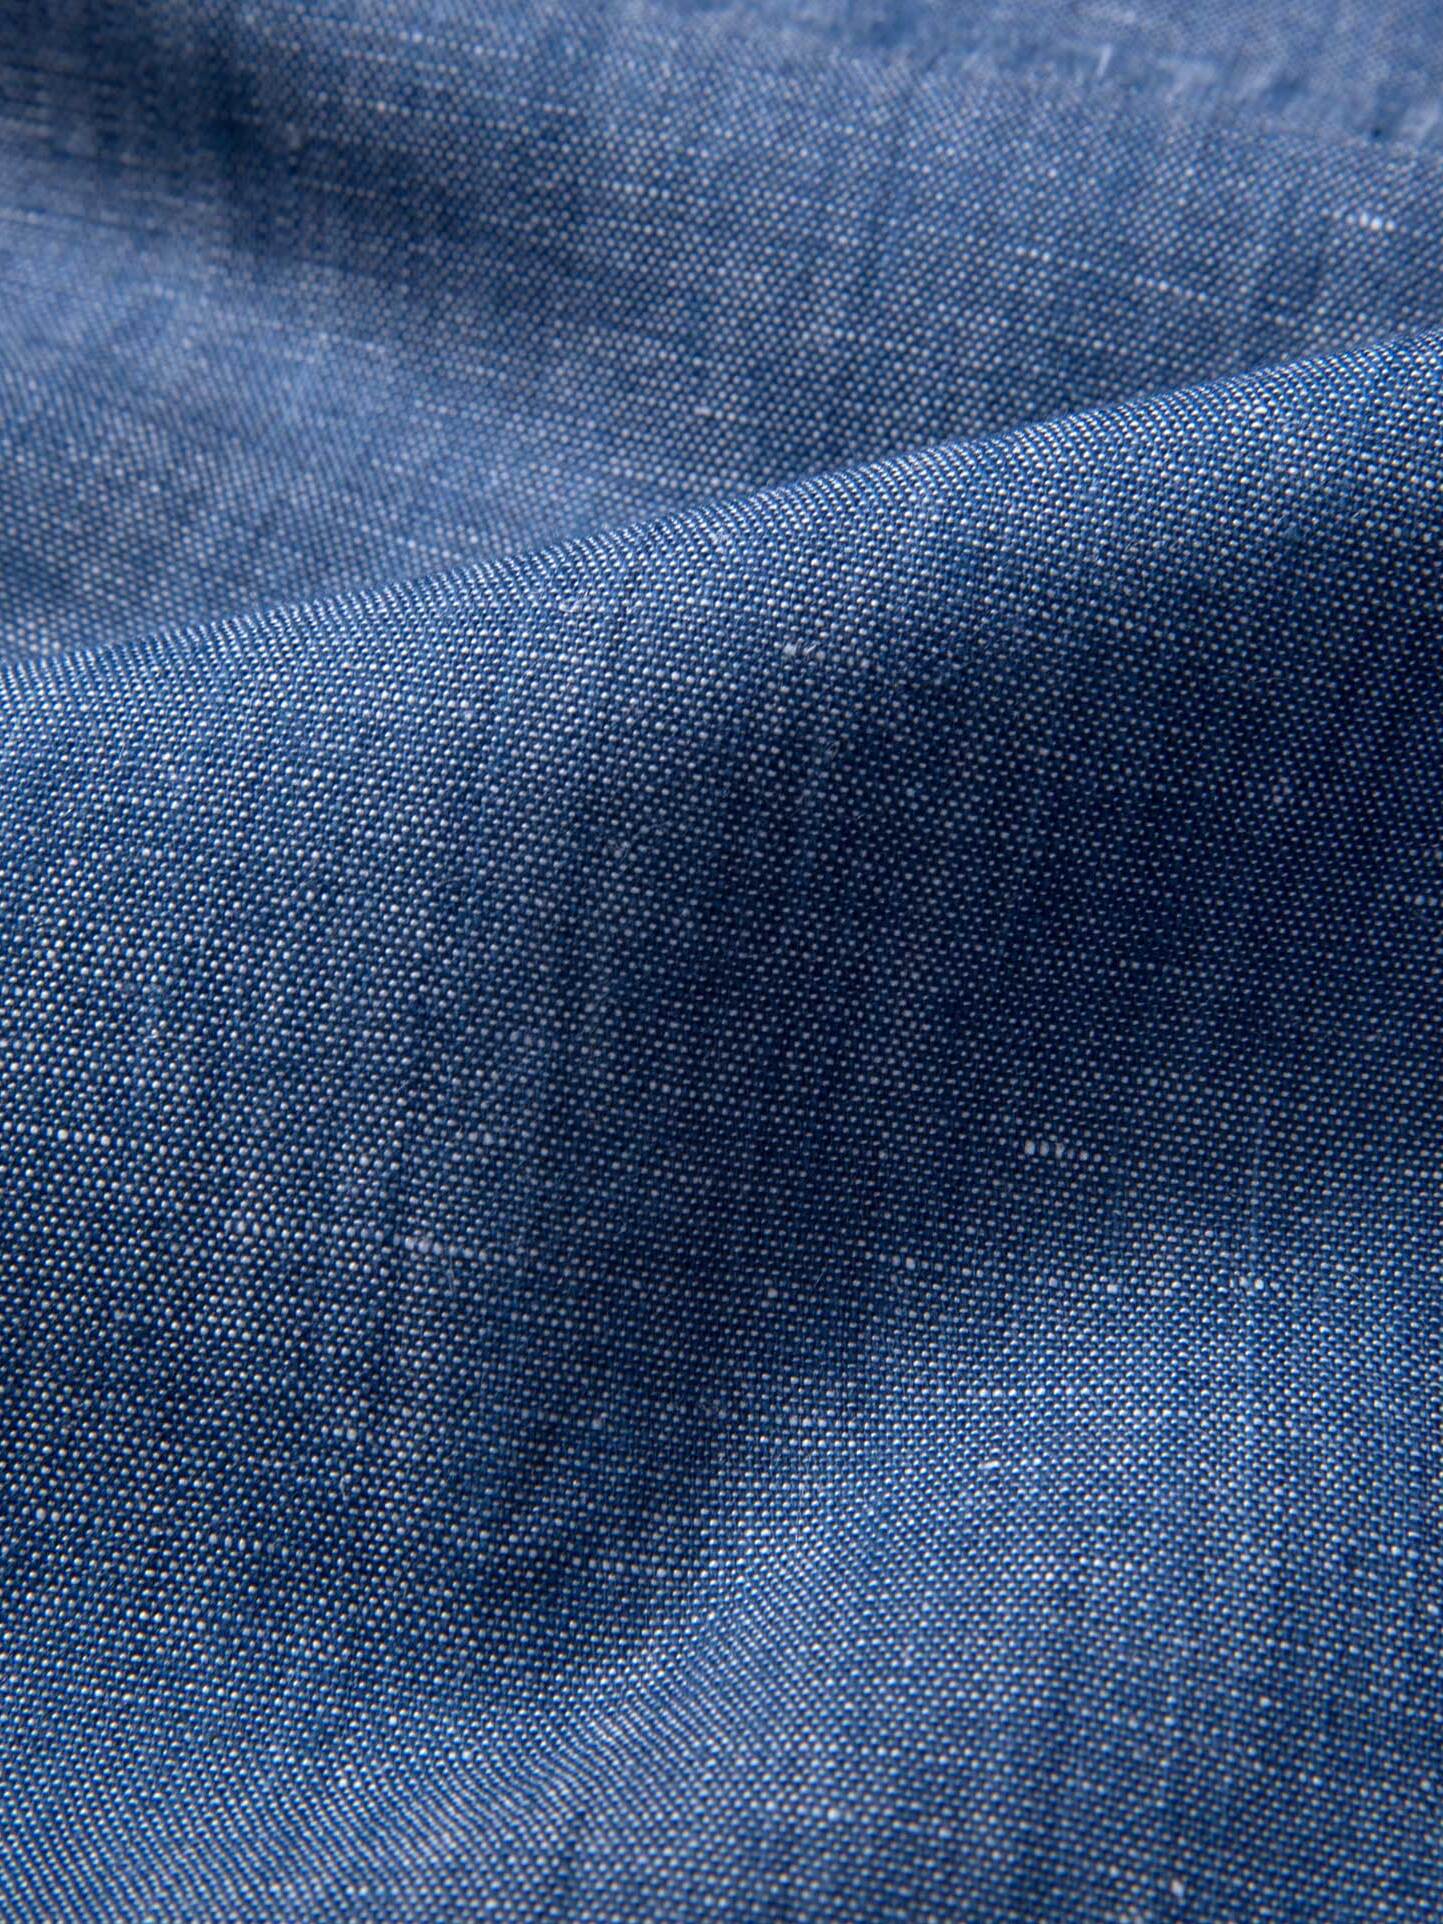 Japanese Cotton and Linen Chambray Shirts by Proper Cloth